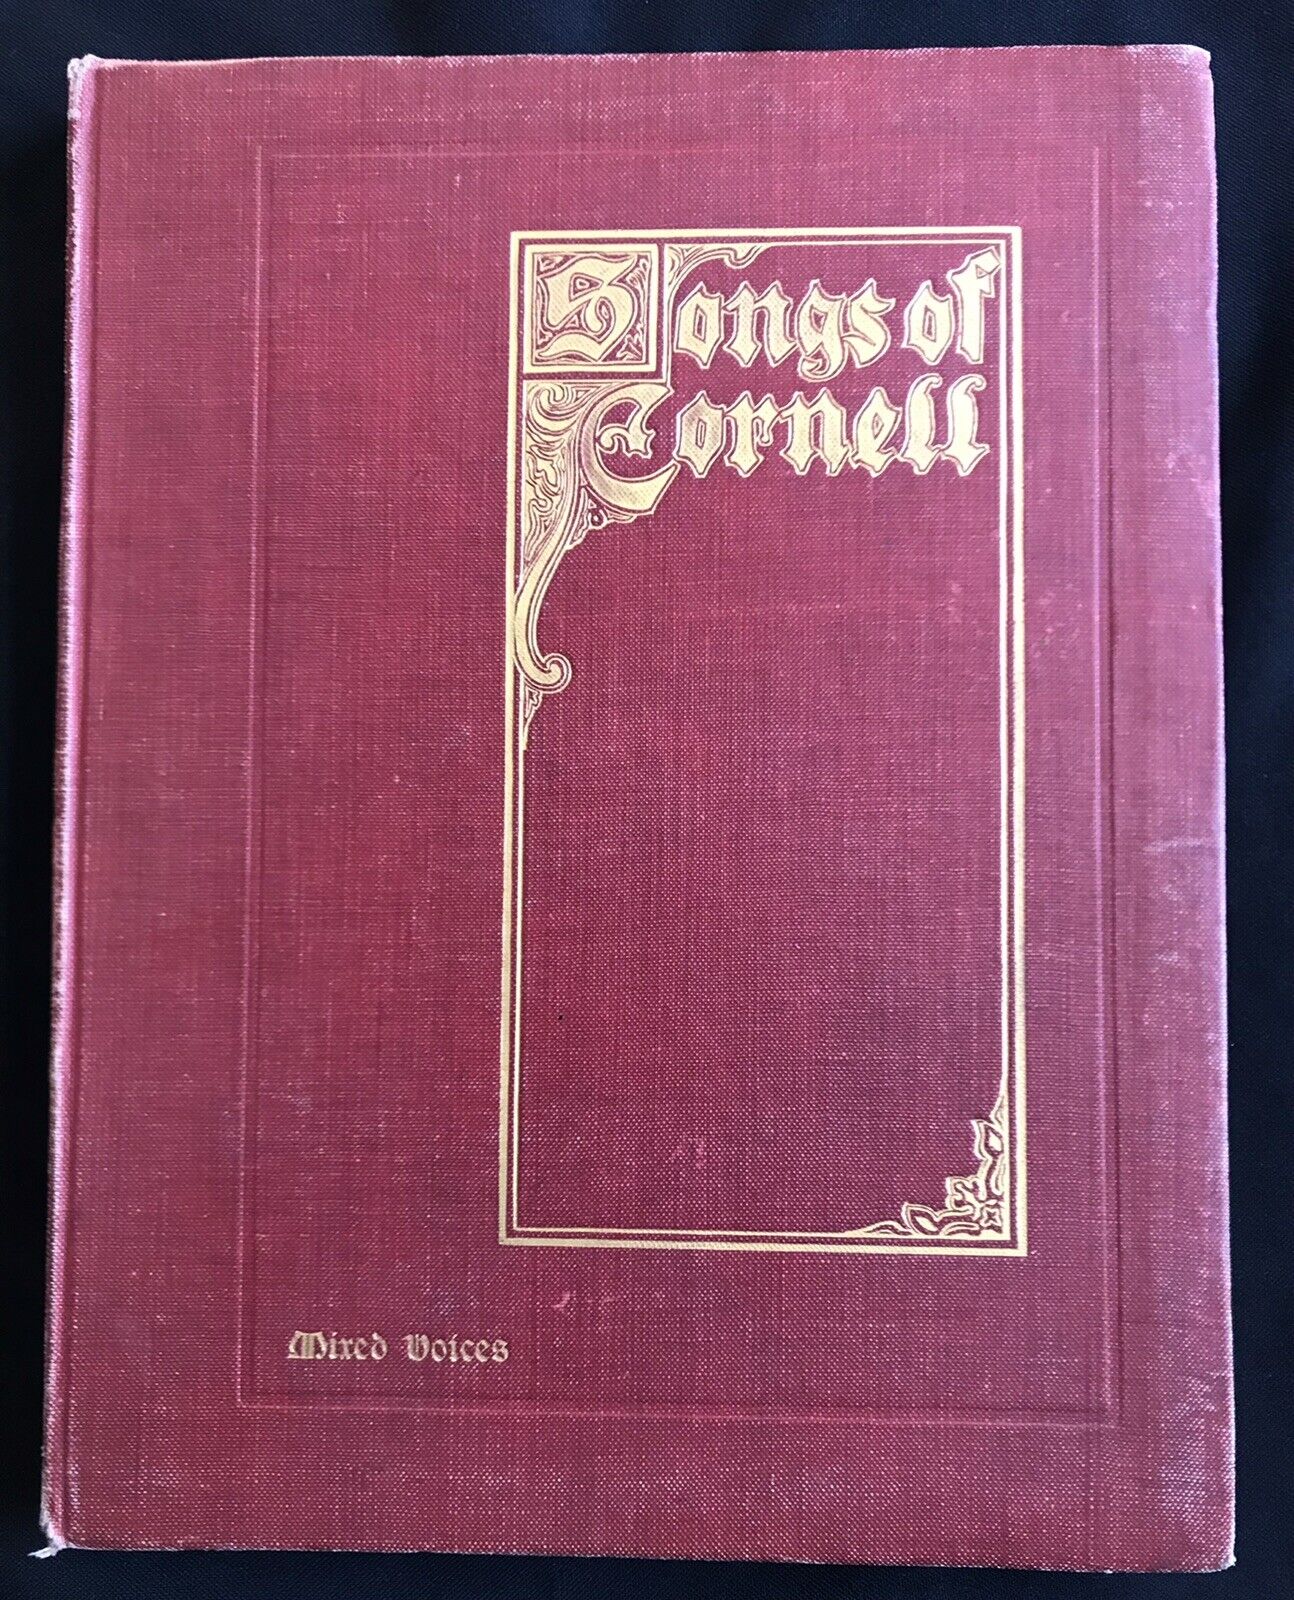 Songs of Cornell Mixed Voices, B. F. Lent Publisher, 1909, Vintage Song Book